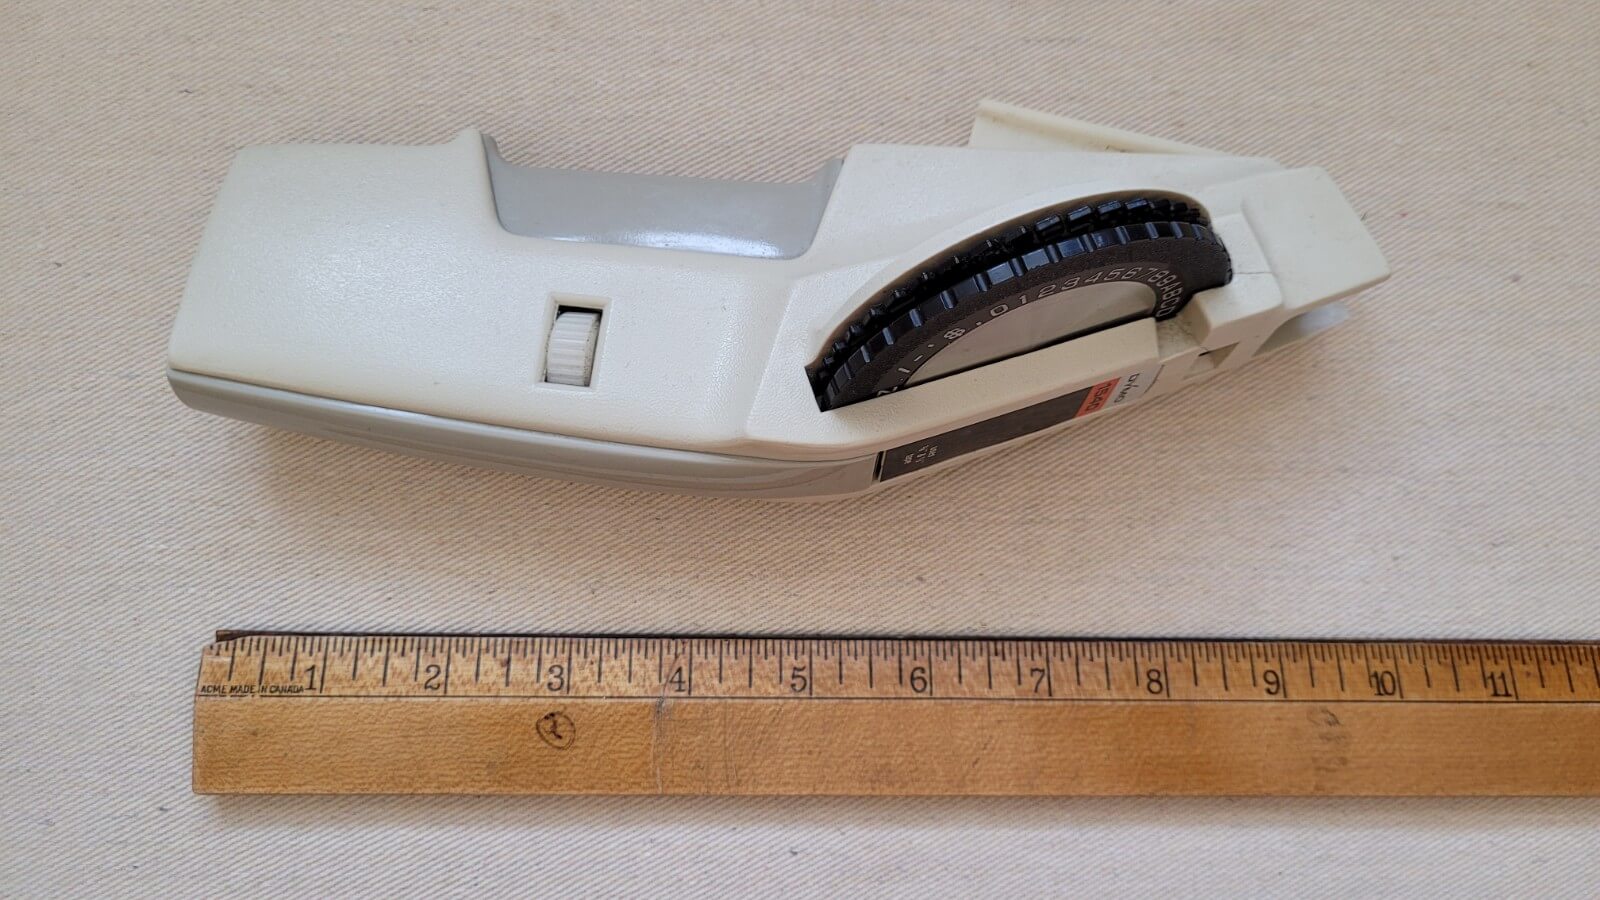 Vintage Dymo Tapewriter 1540 Rotex Embossing Label Maker - Collectible Office Equipment